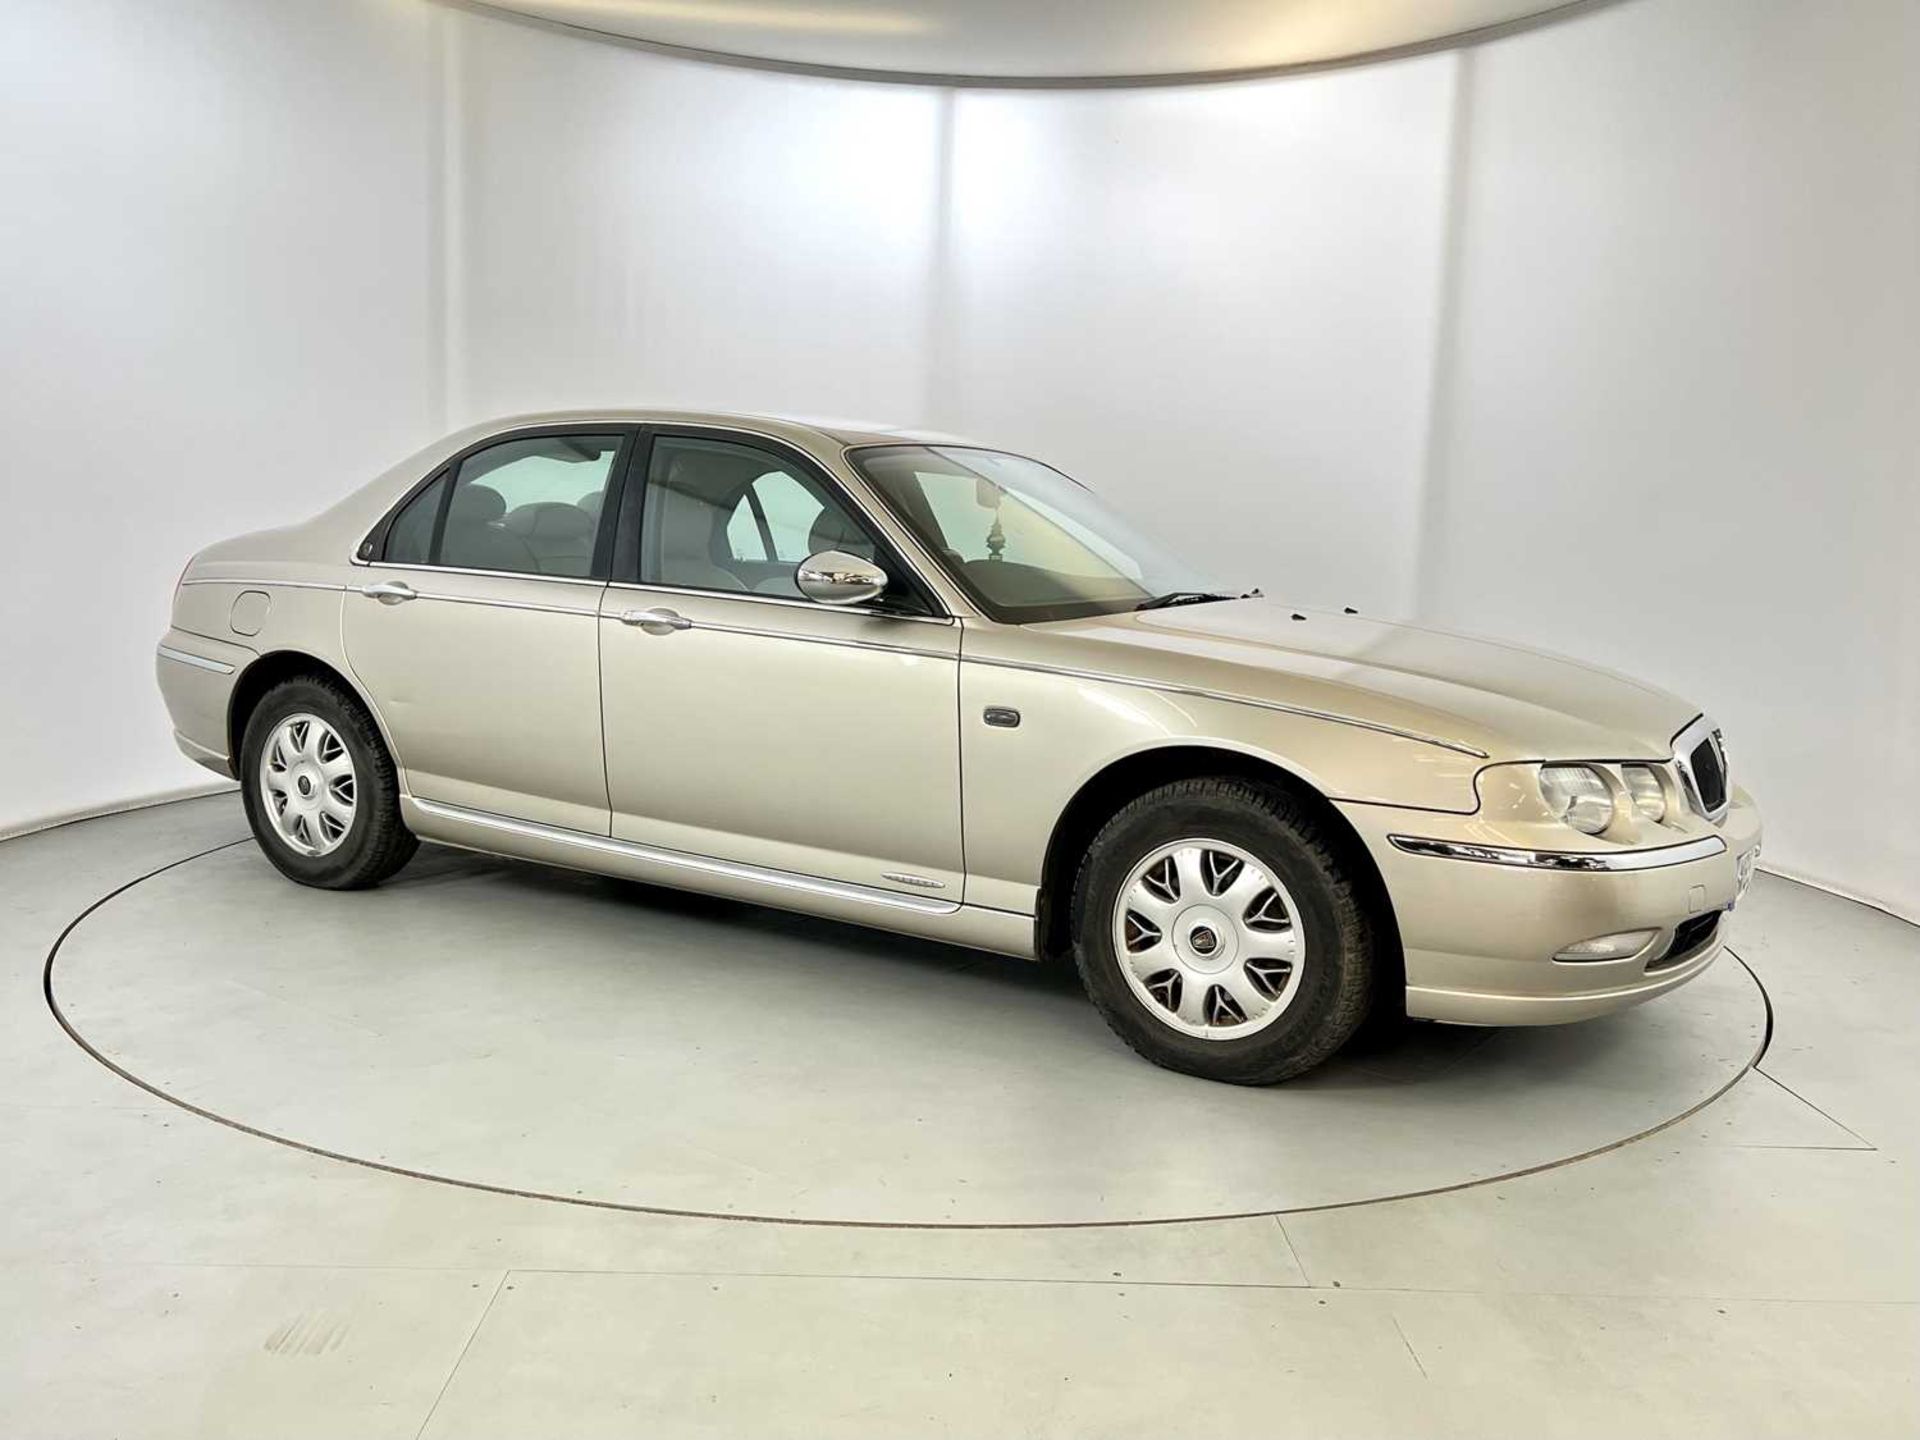 2000 Rover 75 Connoisseur - Image 12 of 34